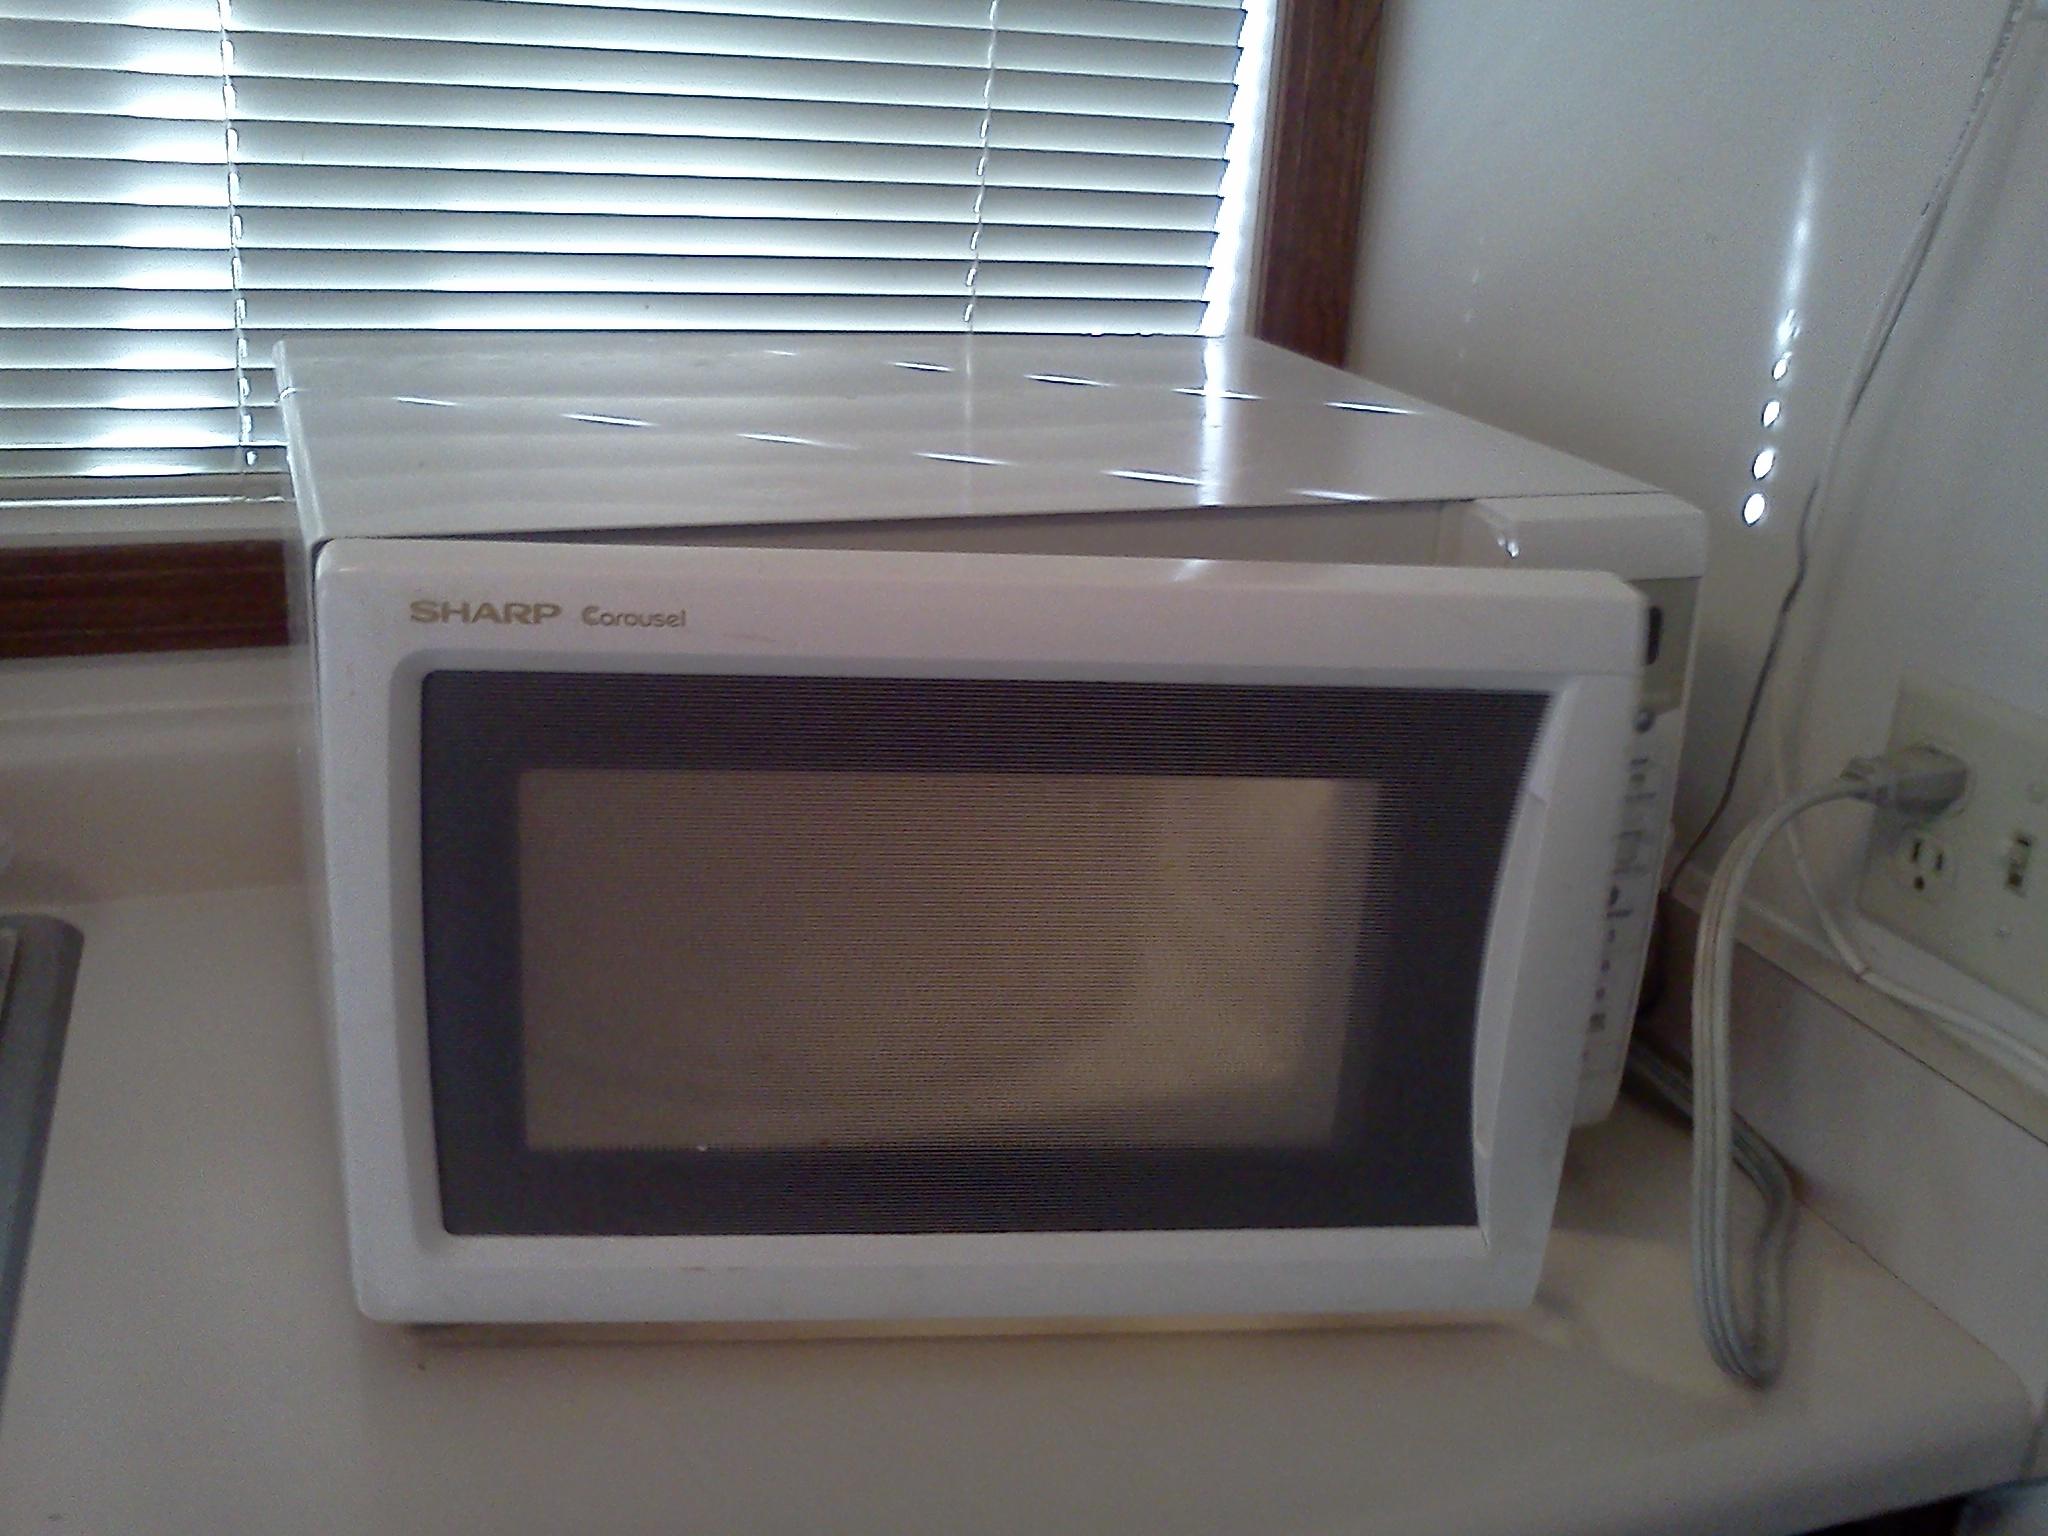 Microwave Oven Pros and Cons